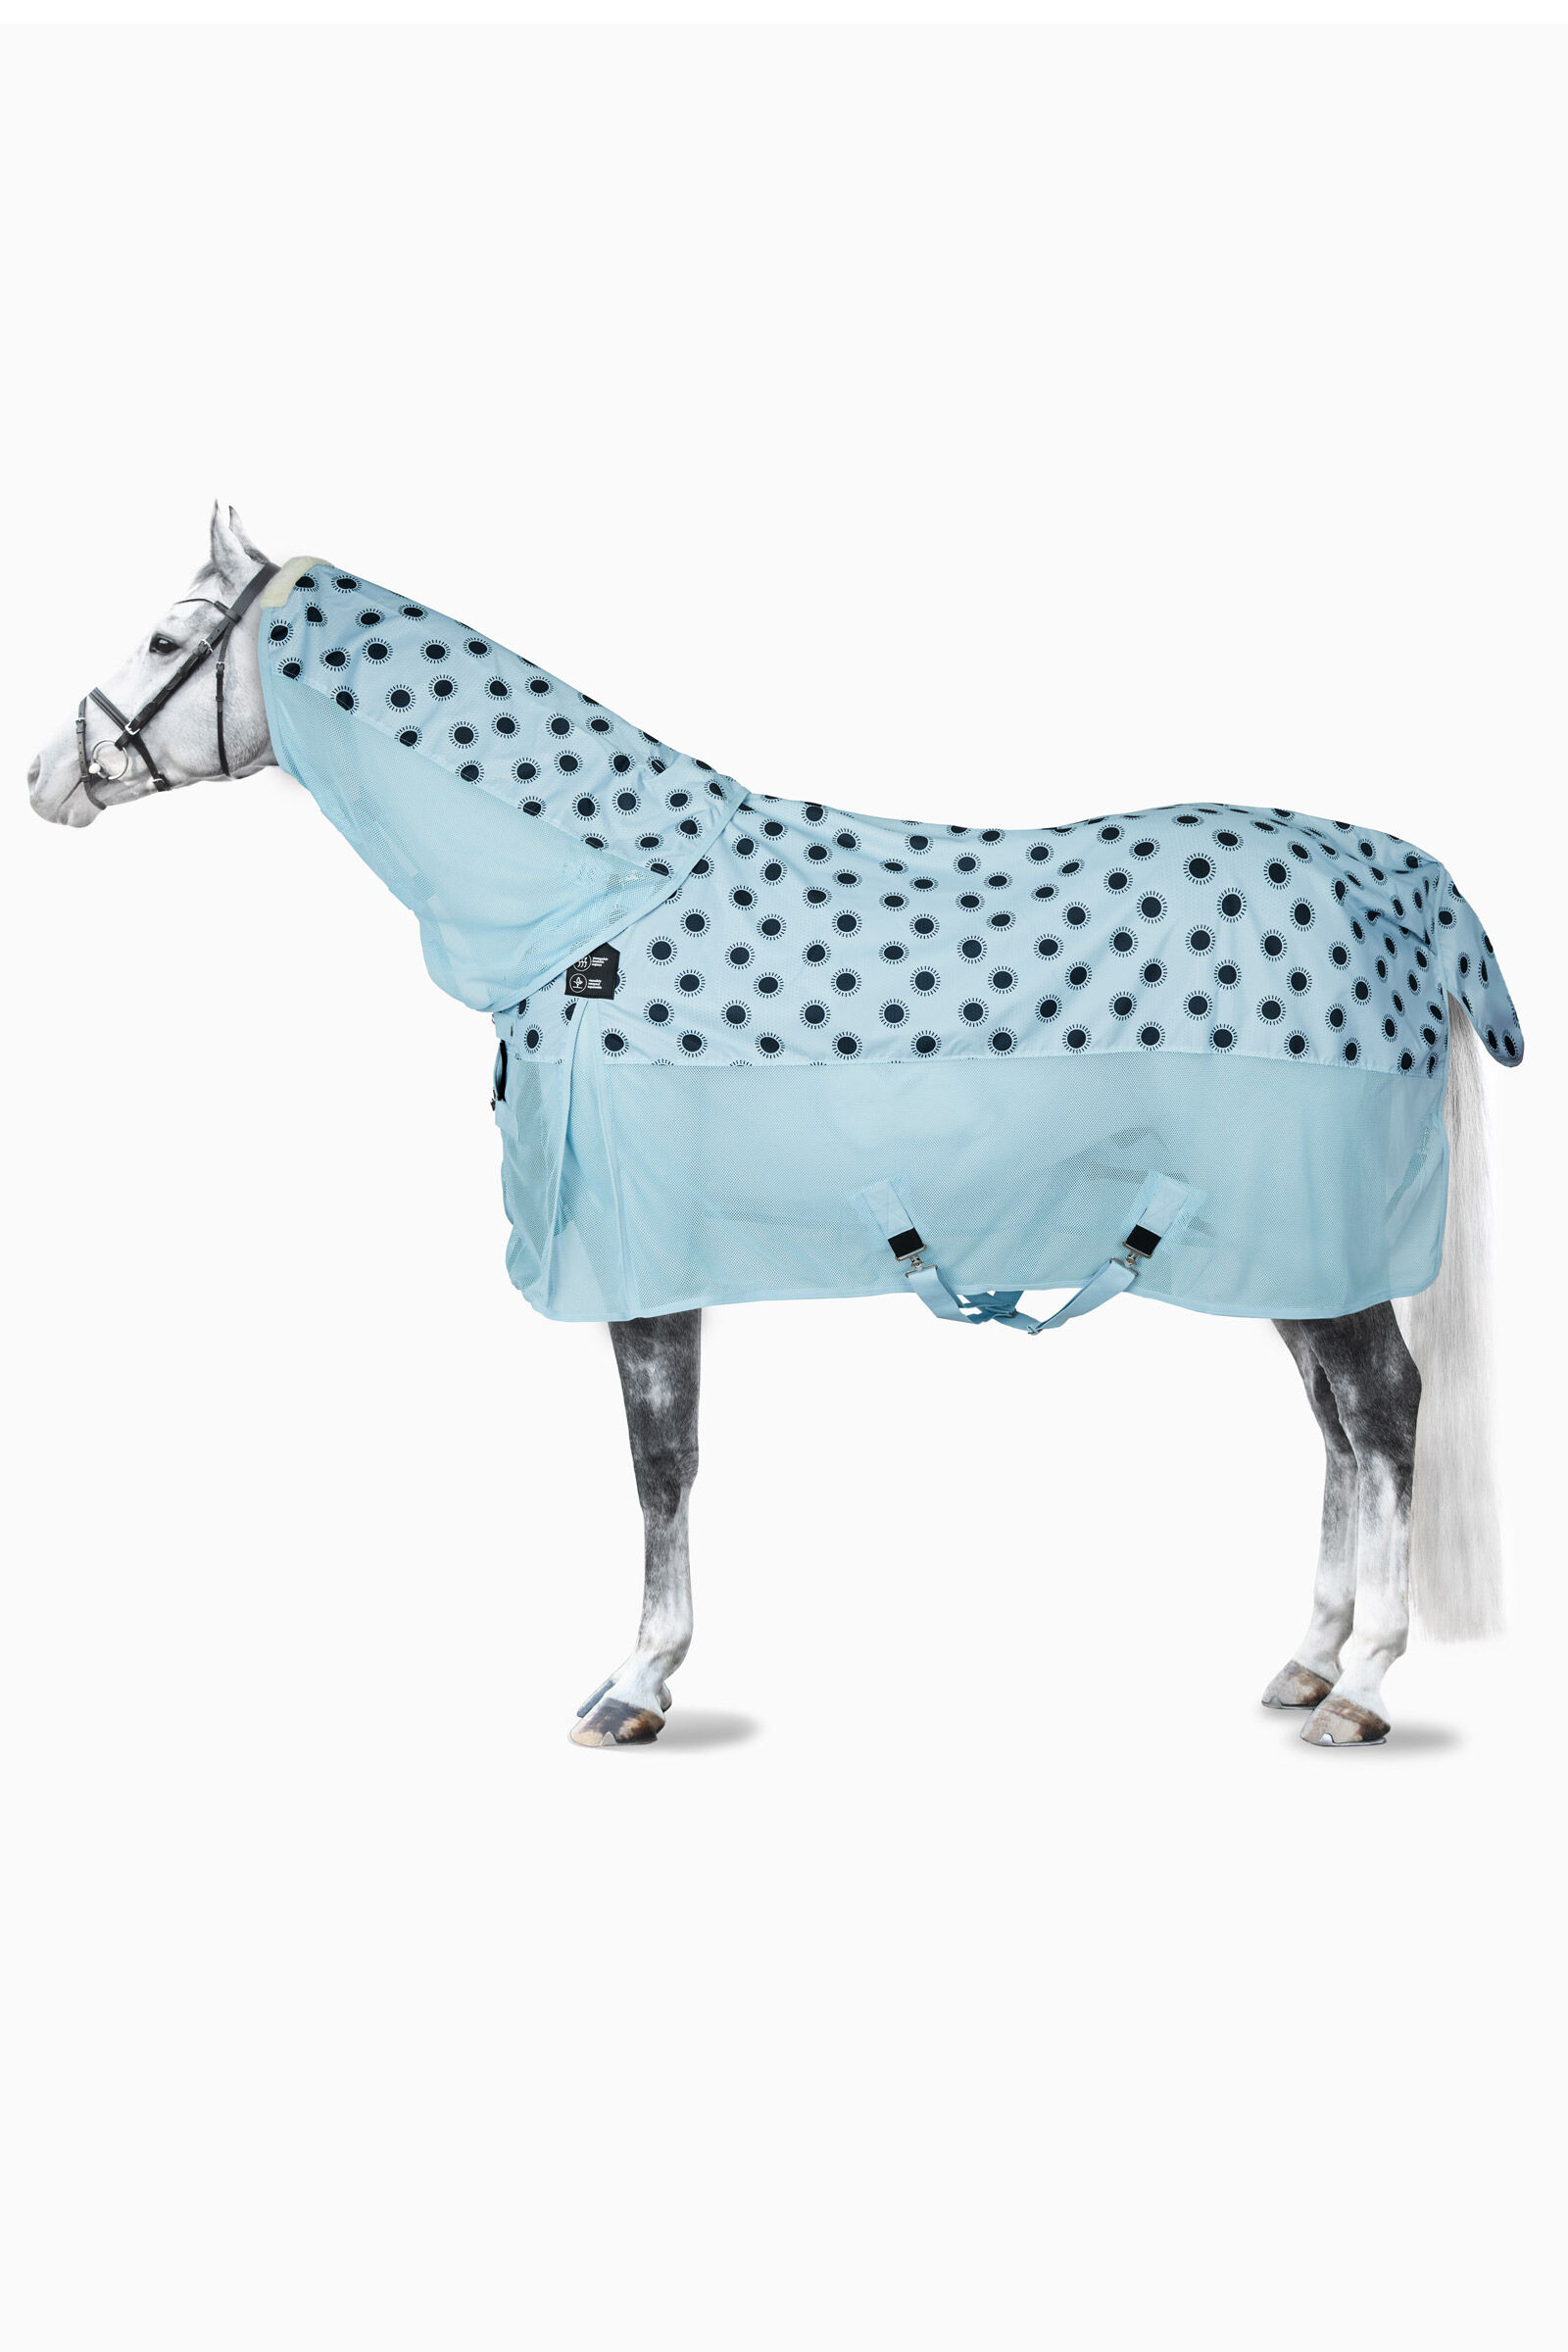 PINK FLEECE HORSE RUG WITH NECK TRAVEL 240GSM Medium weight Thermal Winter Rug 